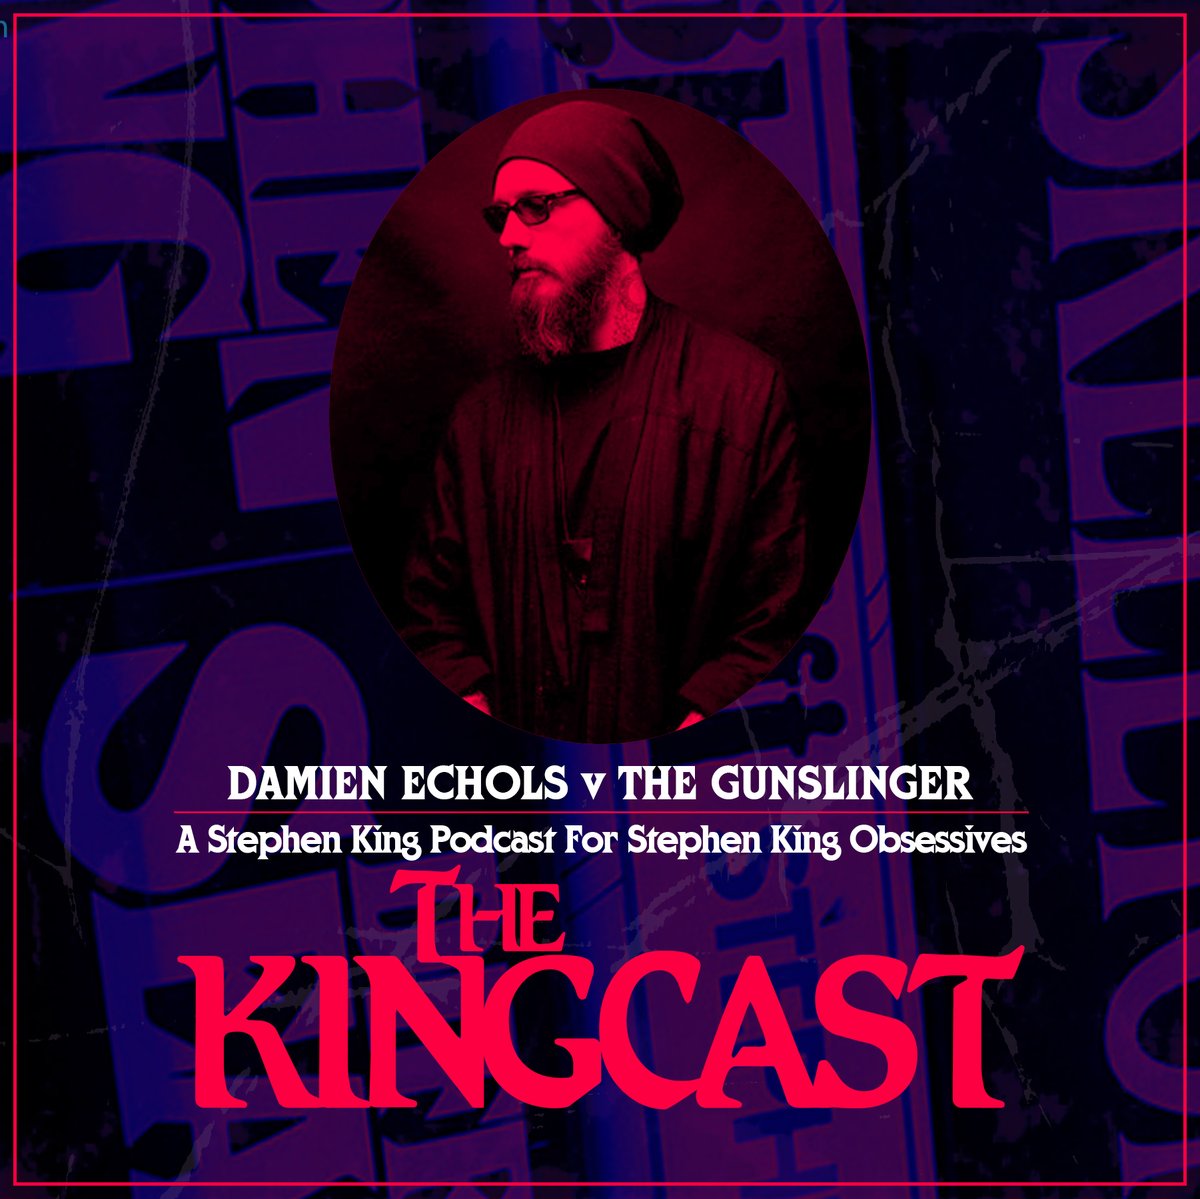 So this week, THE KINGCAST is proud to welcome  @damienechols to the show. He’ll be taking on THE GUNSLINGER - a book he read over 30 times on death row. Turns out THE DARK TOWER series meant quite a bit to Damien while he was in prison, and he’s got much to say about it.